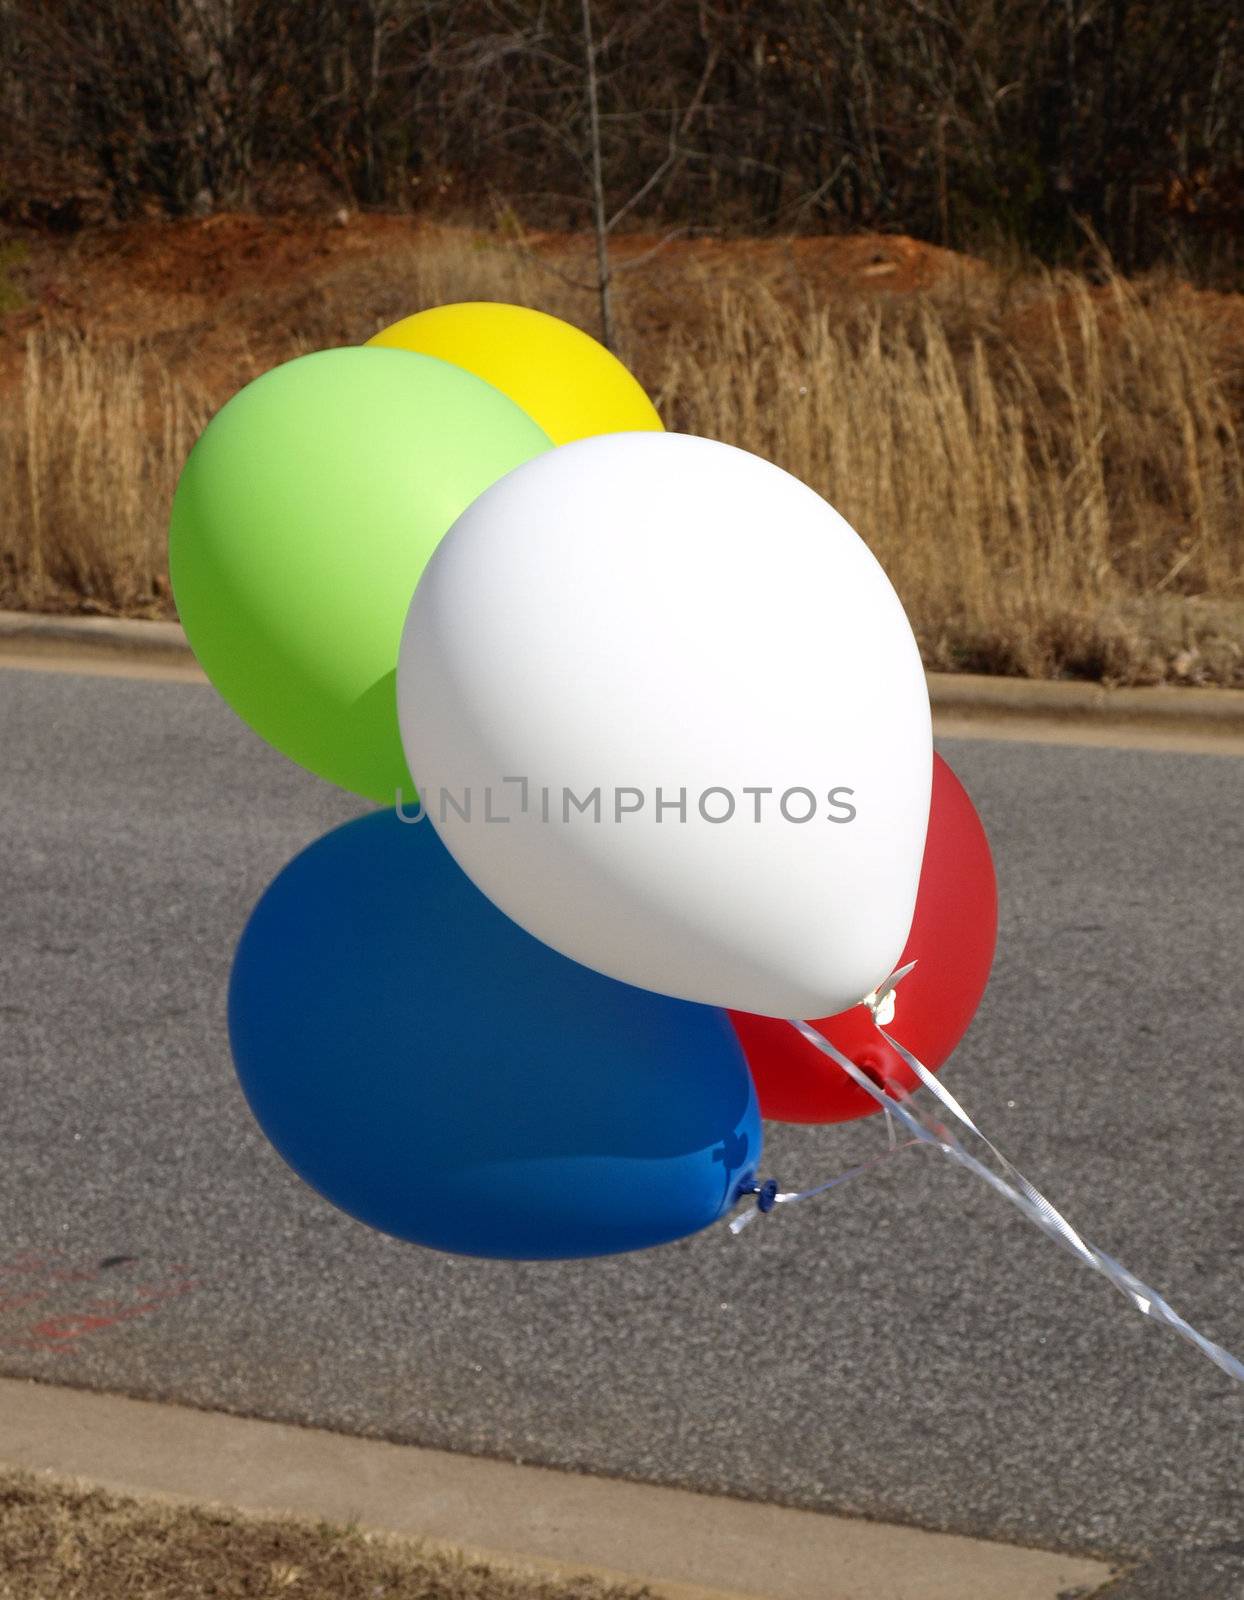 Balloons up close in the road to show where to turn